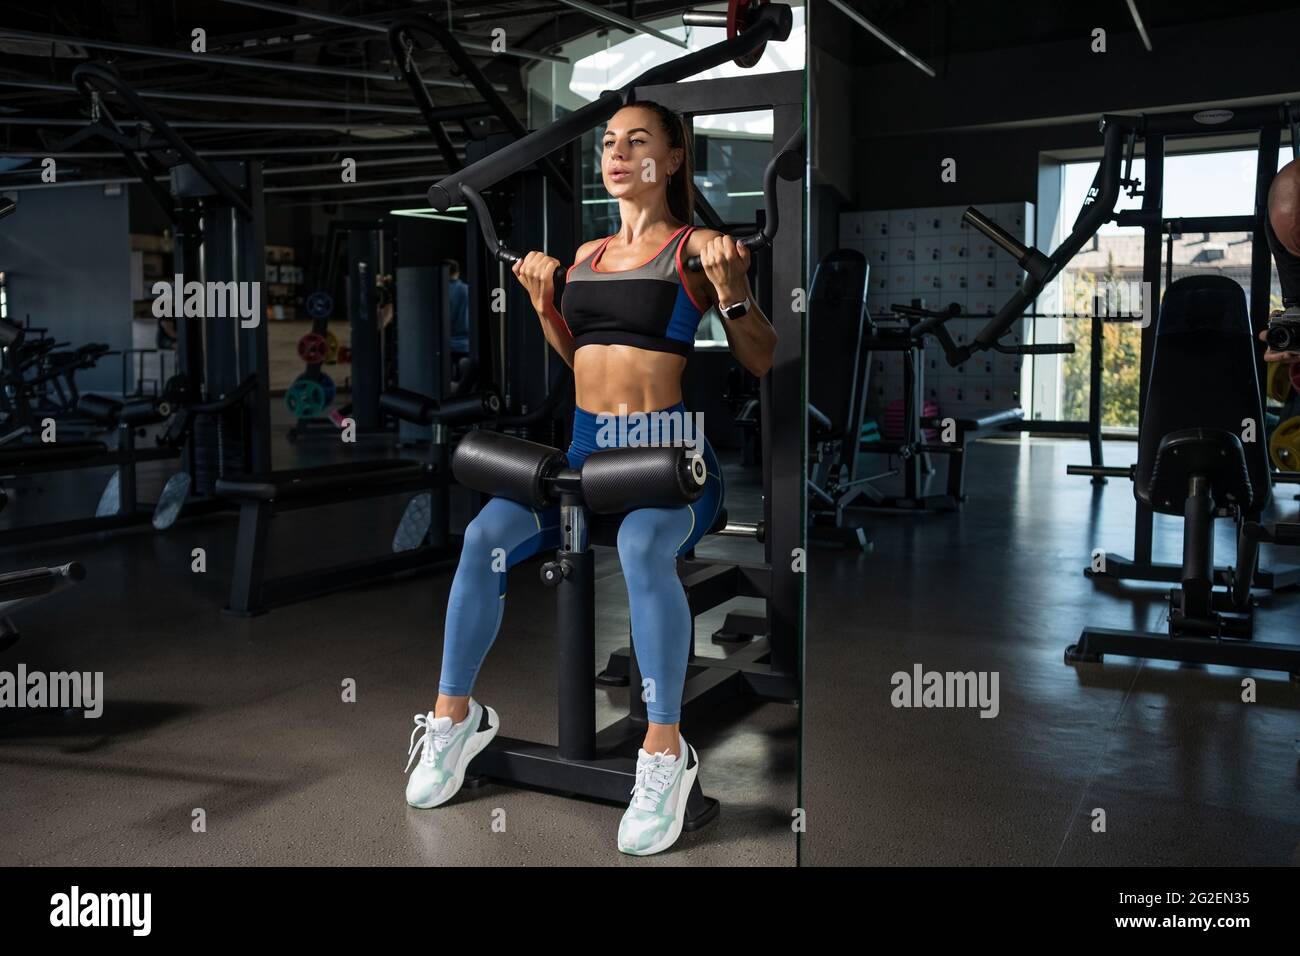 Girl doing exercises for back muscles on strength machine at gym Stock Photo